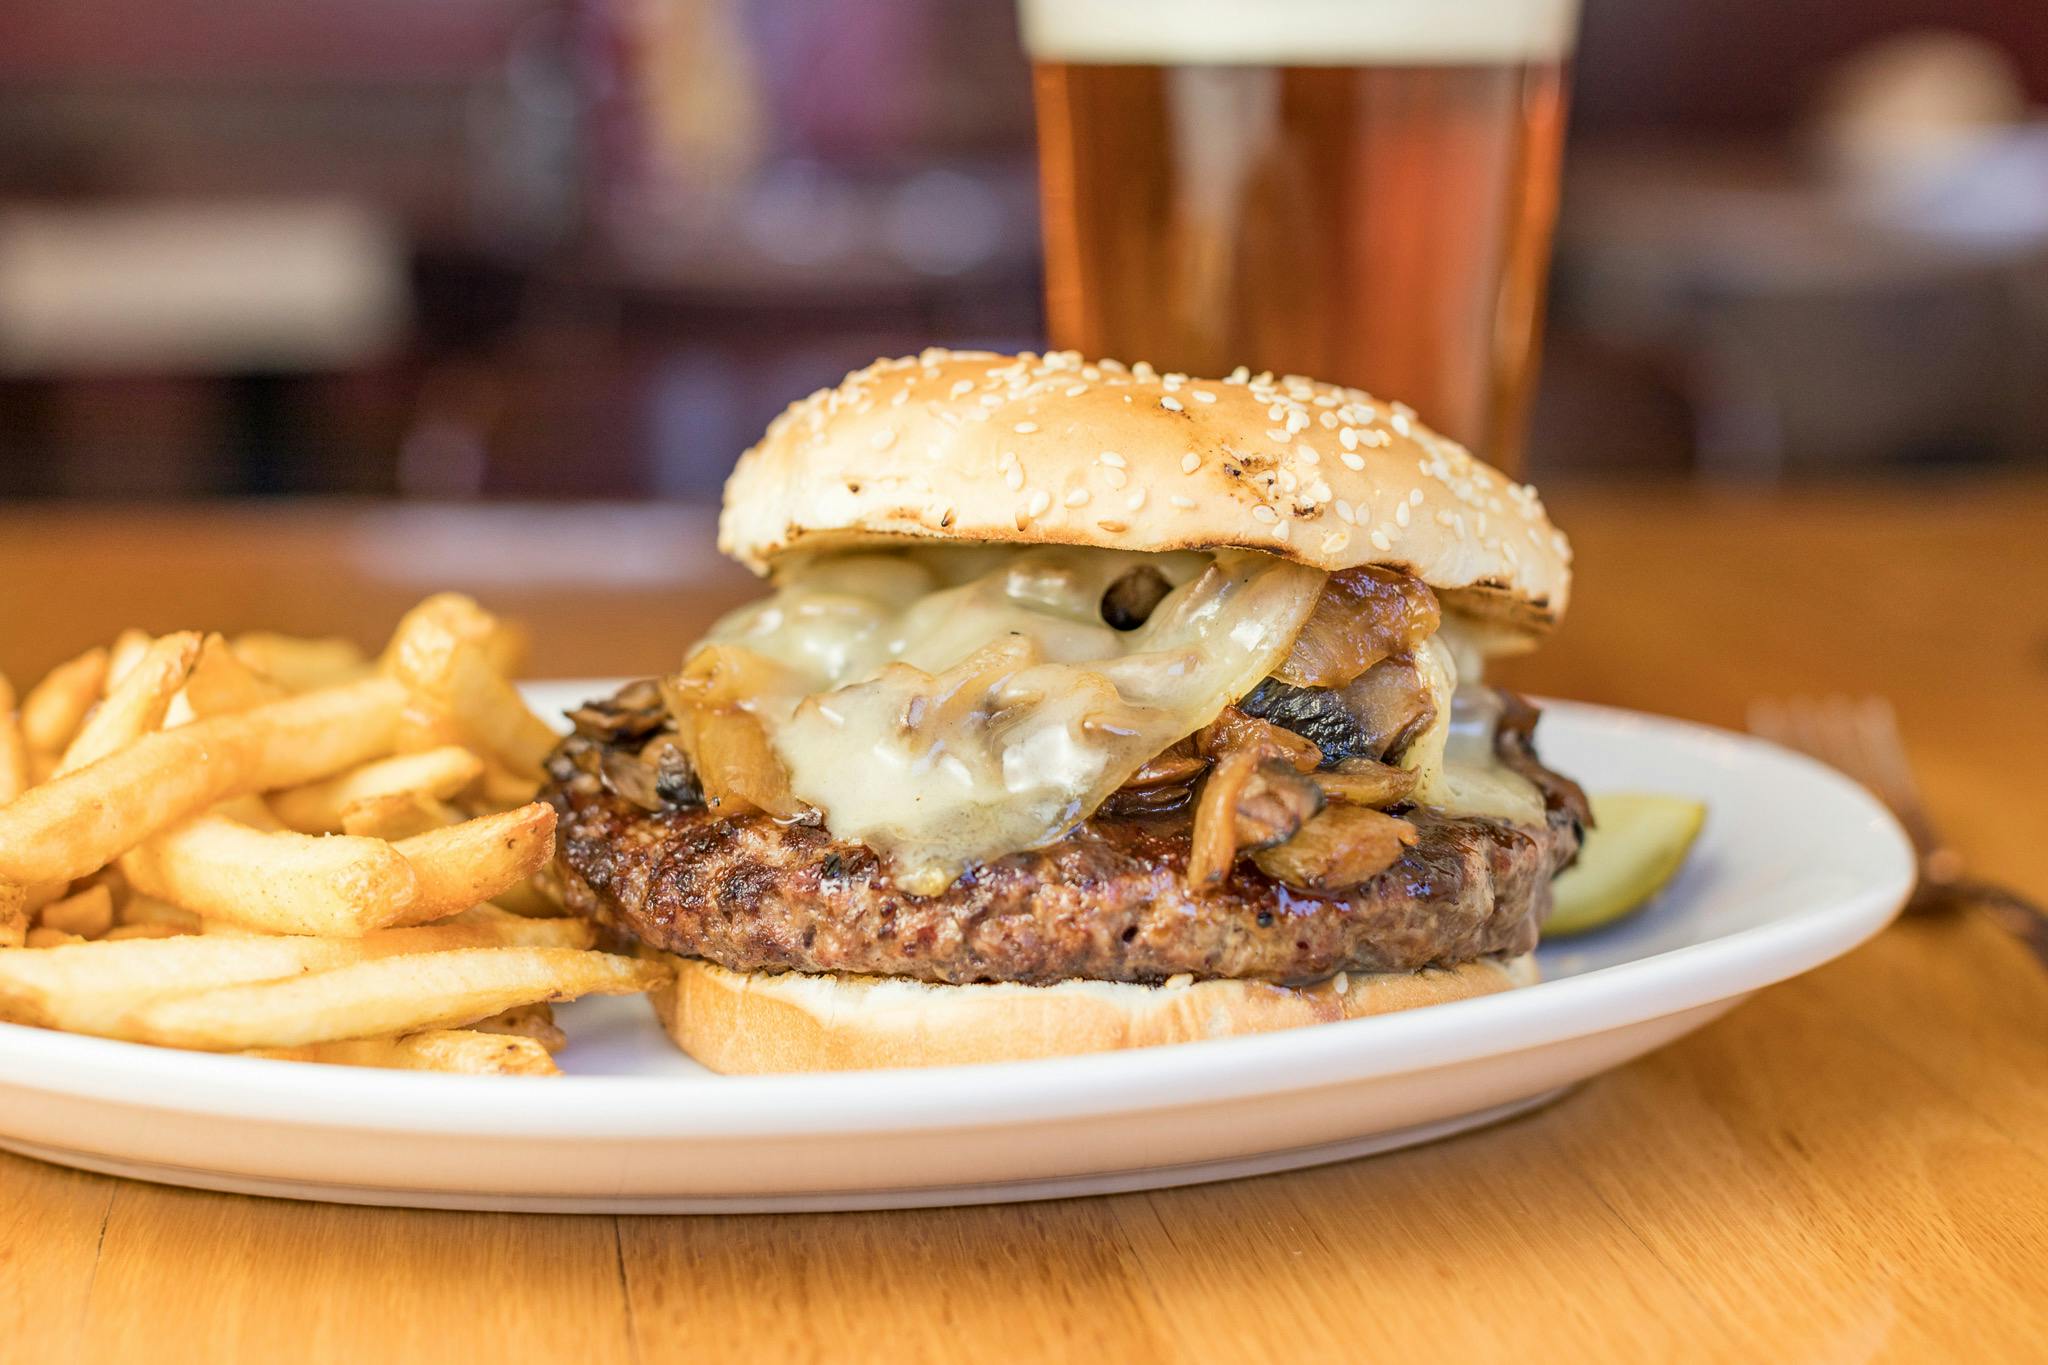 Mushroom Swiss Burger from Mogie's Pub & Restaurant in Eau Claire, WI